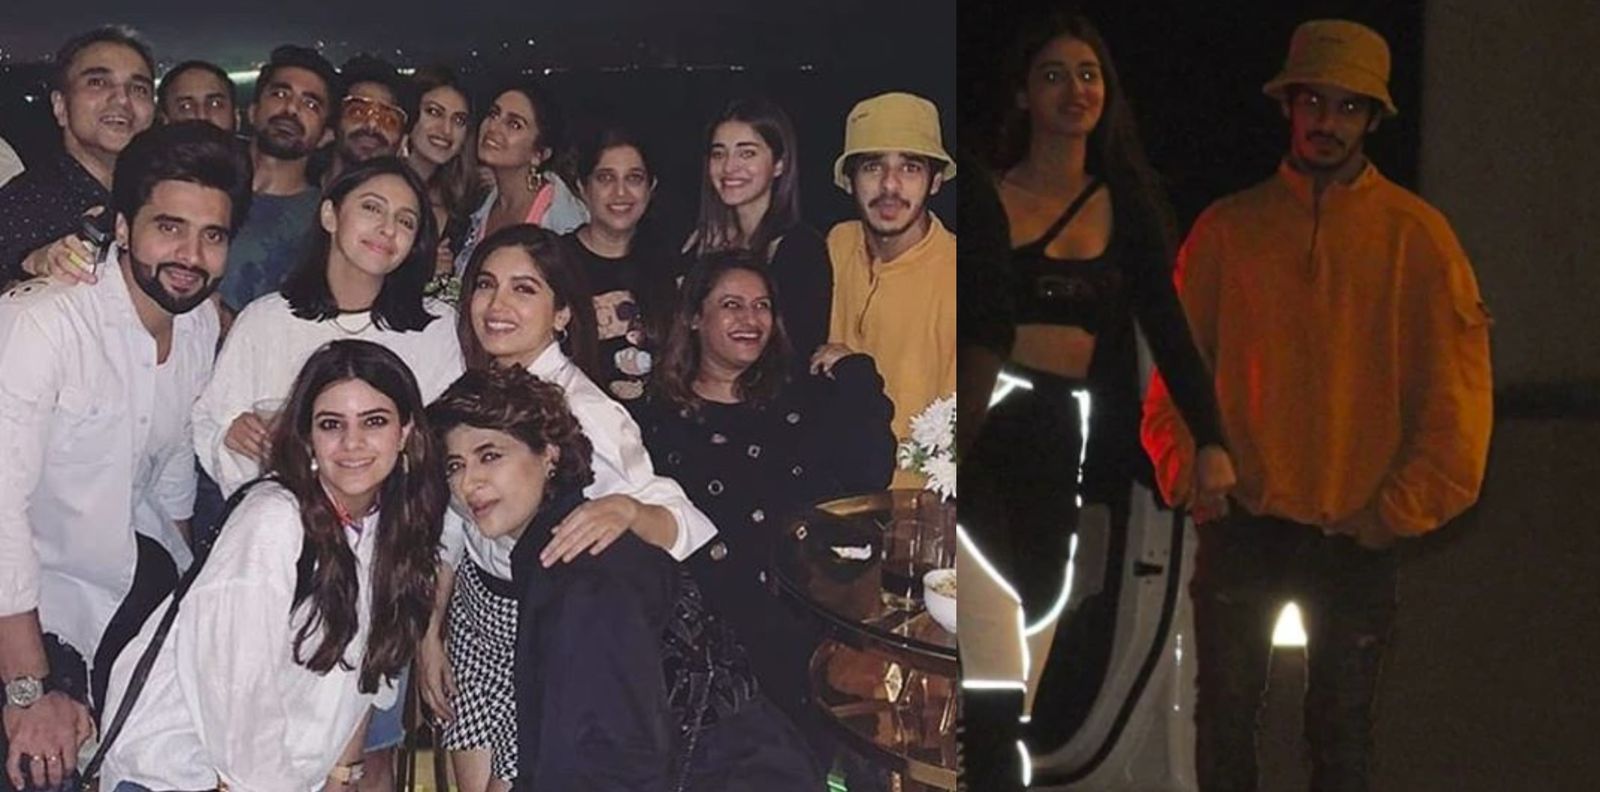 Ananya Panday Arrives At Bhumi Pednekar’s Party With Ishaan Khattar, Steals The Show With Her LED Pants!